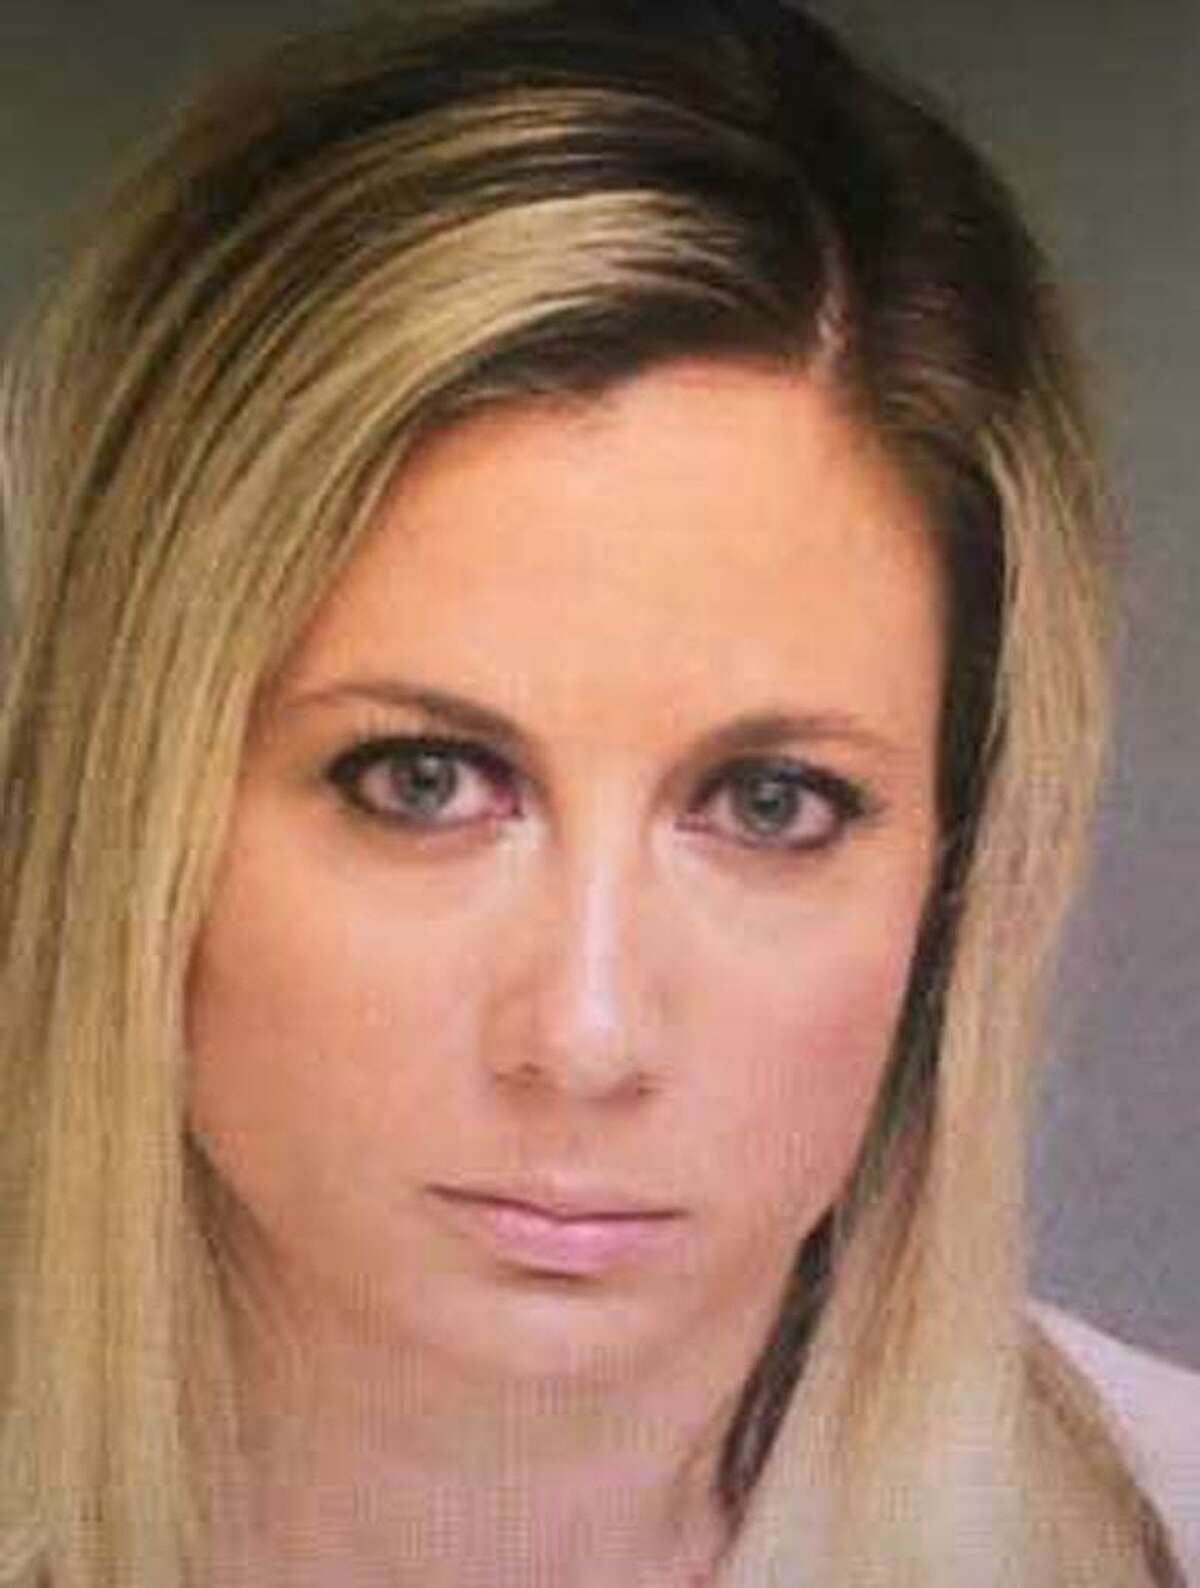 Laura Ramos, 31, of Milford, a teacher at Central High School in Bridgeport was charged Tuesday with second-degree sexual assault after police said she admitted having sexual intercourse with the 18-year-old student.